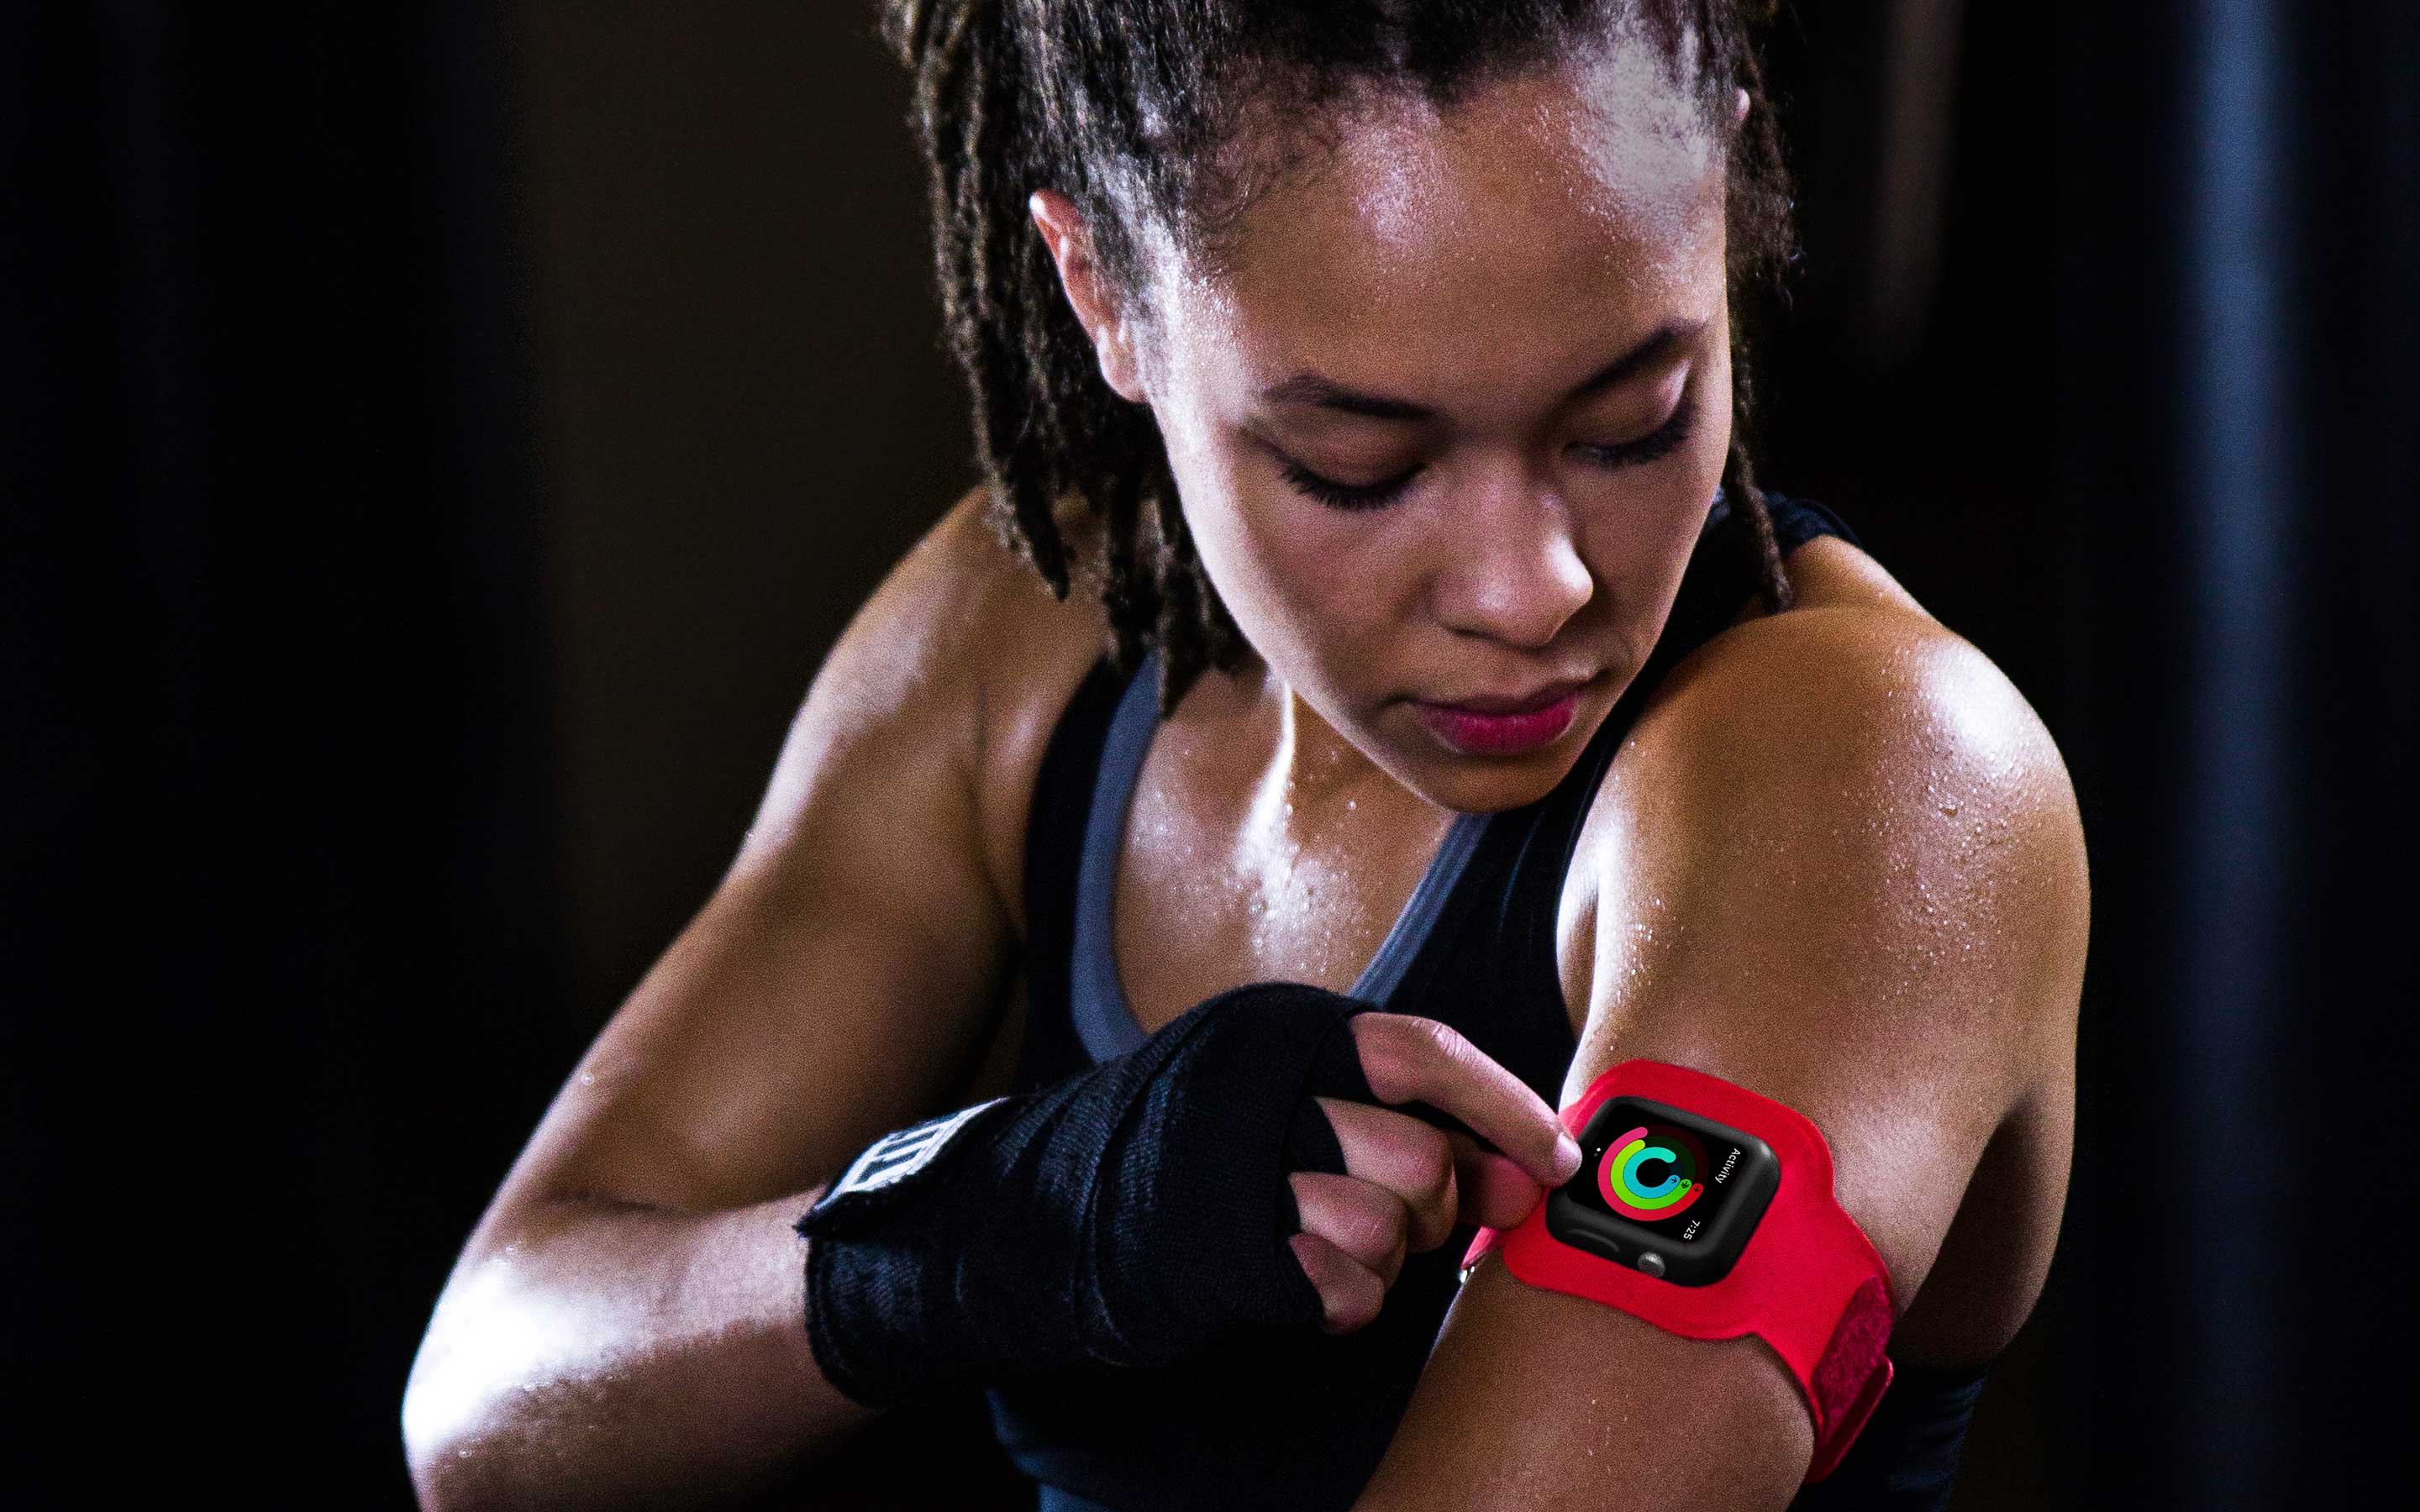 TwelveSouths ActionSleeve Straps the Apple Watch To Your Arm for Intense Workouts Watchaware